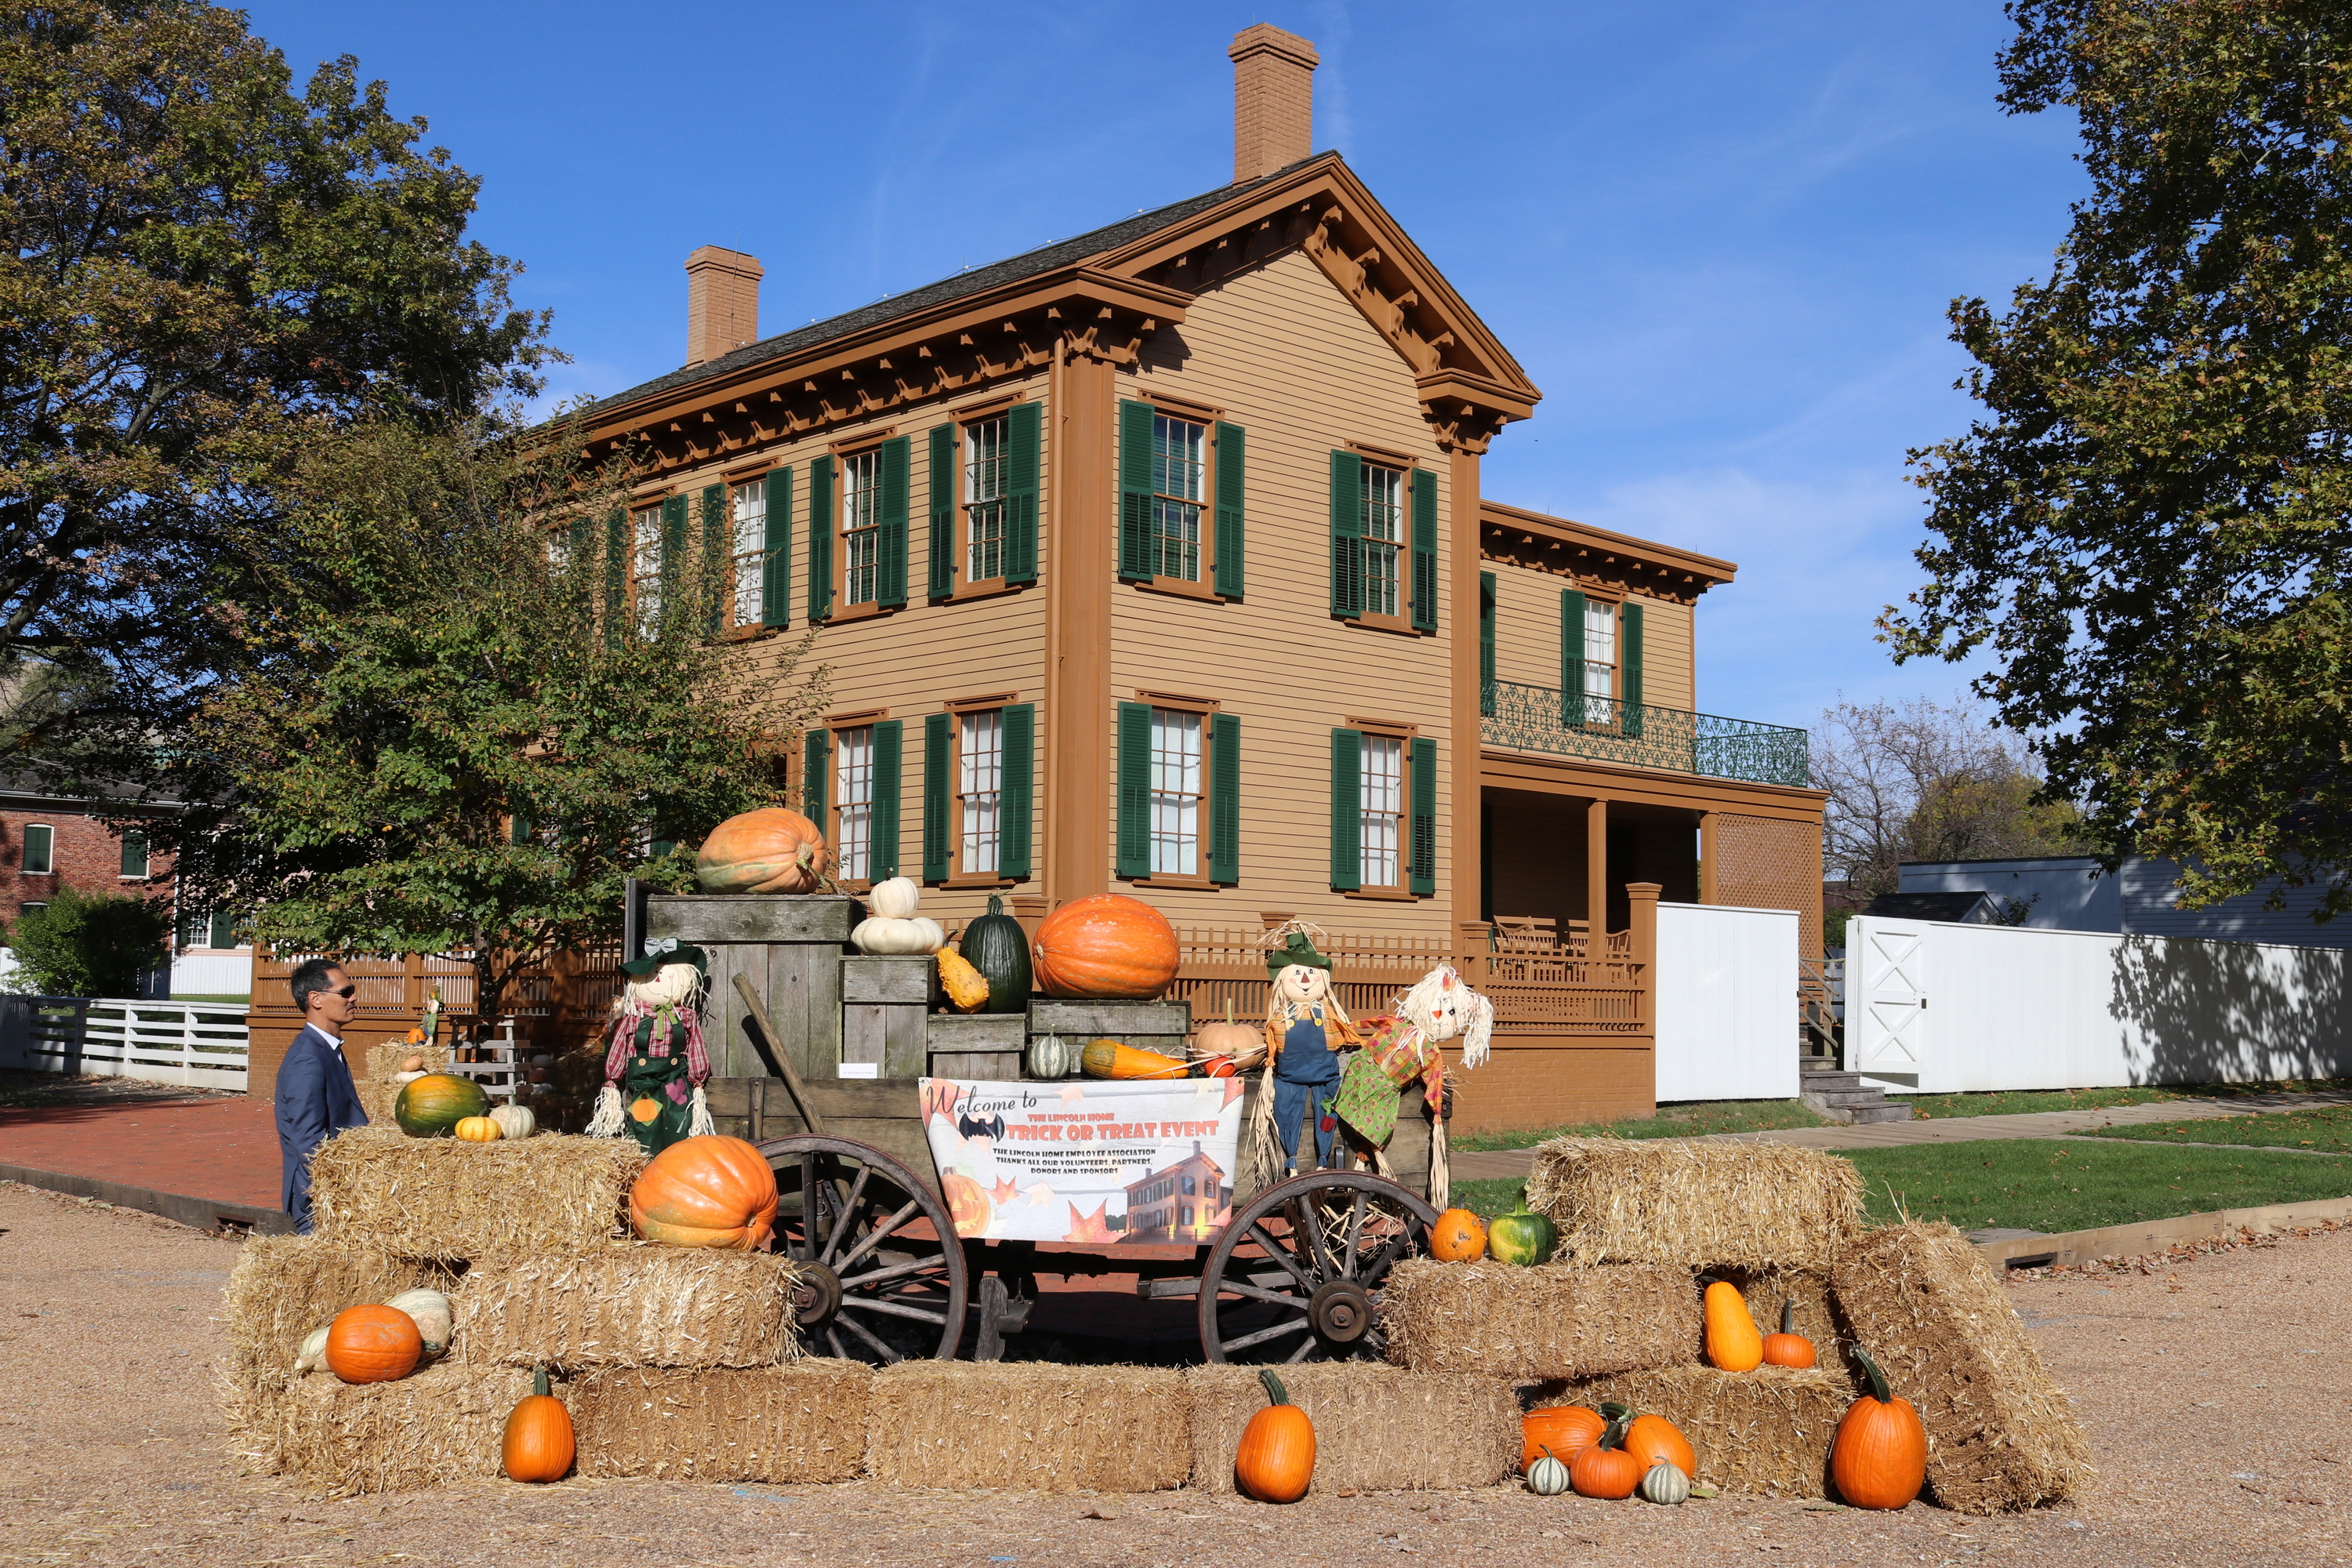 A festive fall display with hay bales, bright orange pumpkins, and a 19th century wagon sit in front of the Lincoln Home, a two-story wooden house with dark brown and green trim.